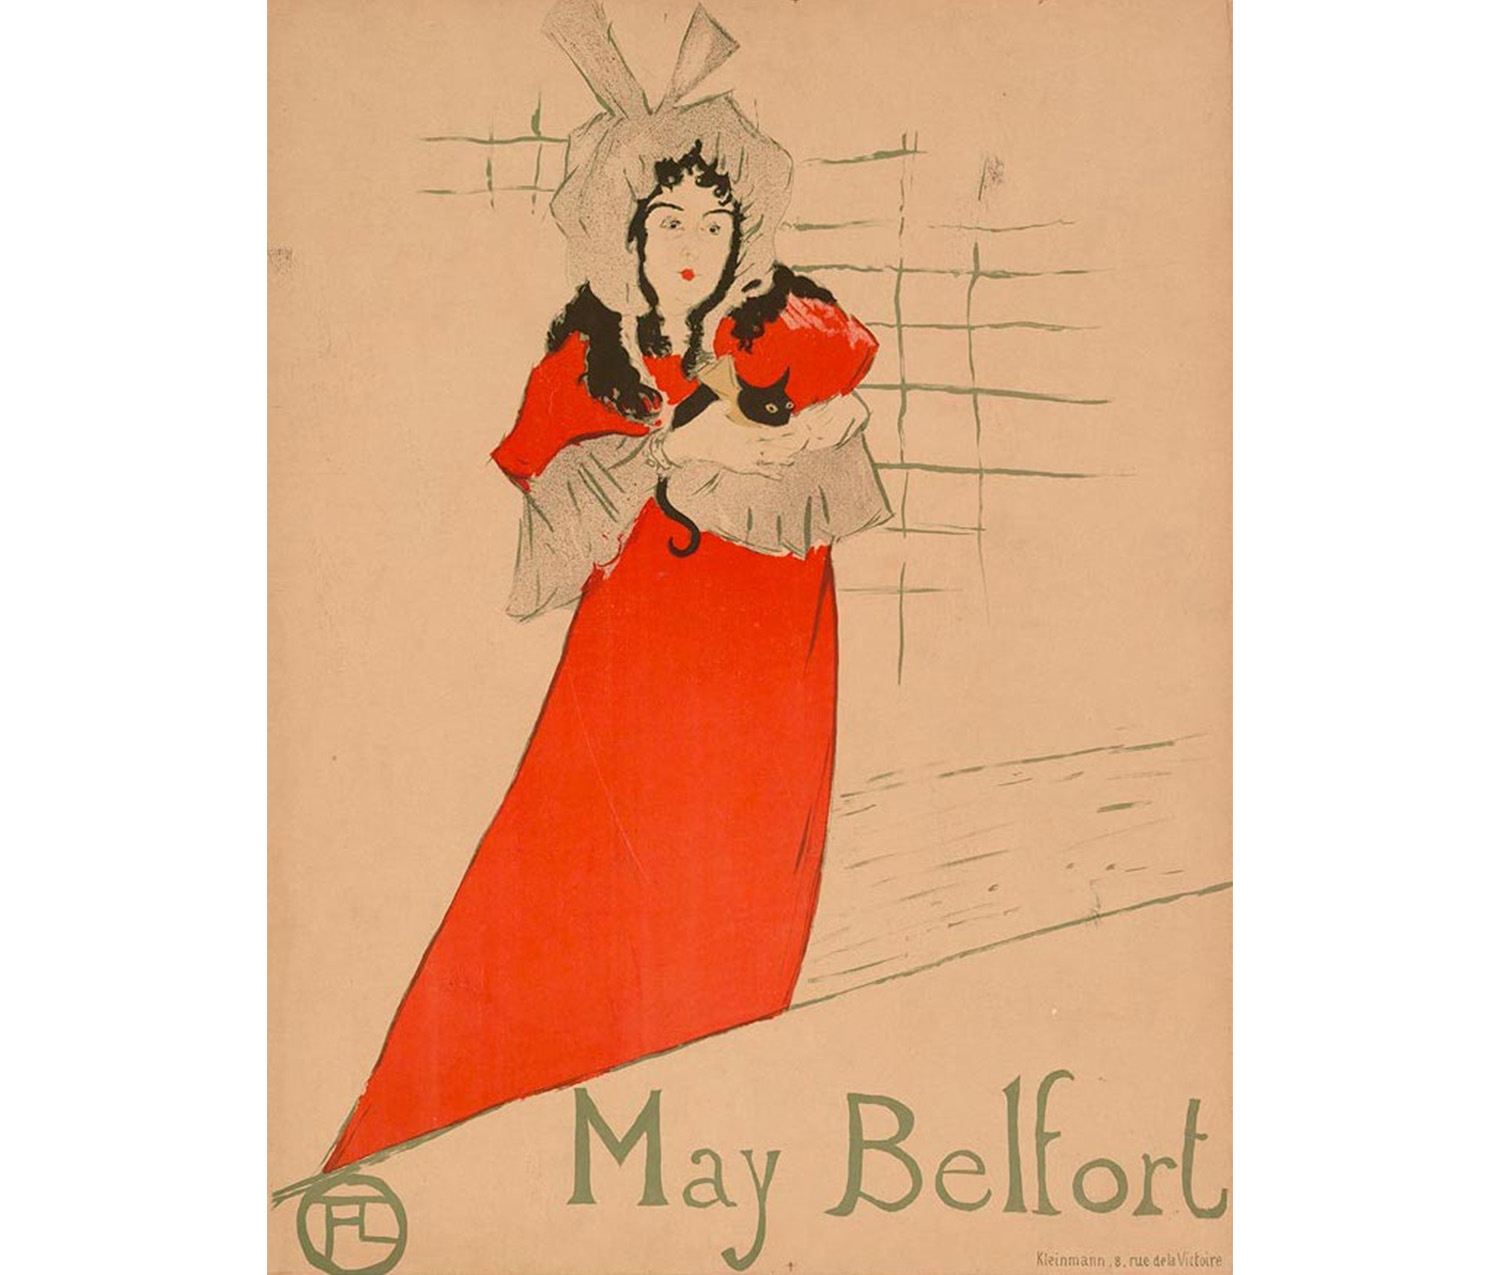 a sketch of a woman with curly dark hair, wearing a large white bonnet and a bright red dress and carrying a black cat